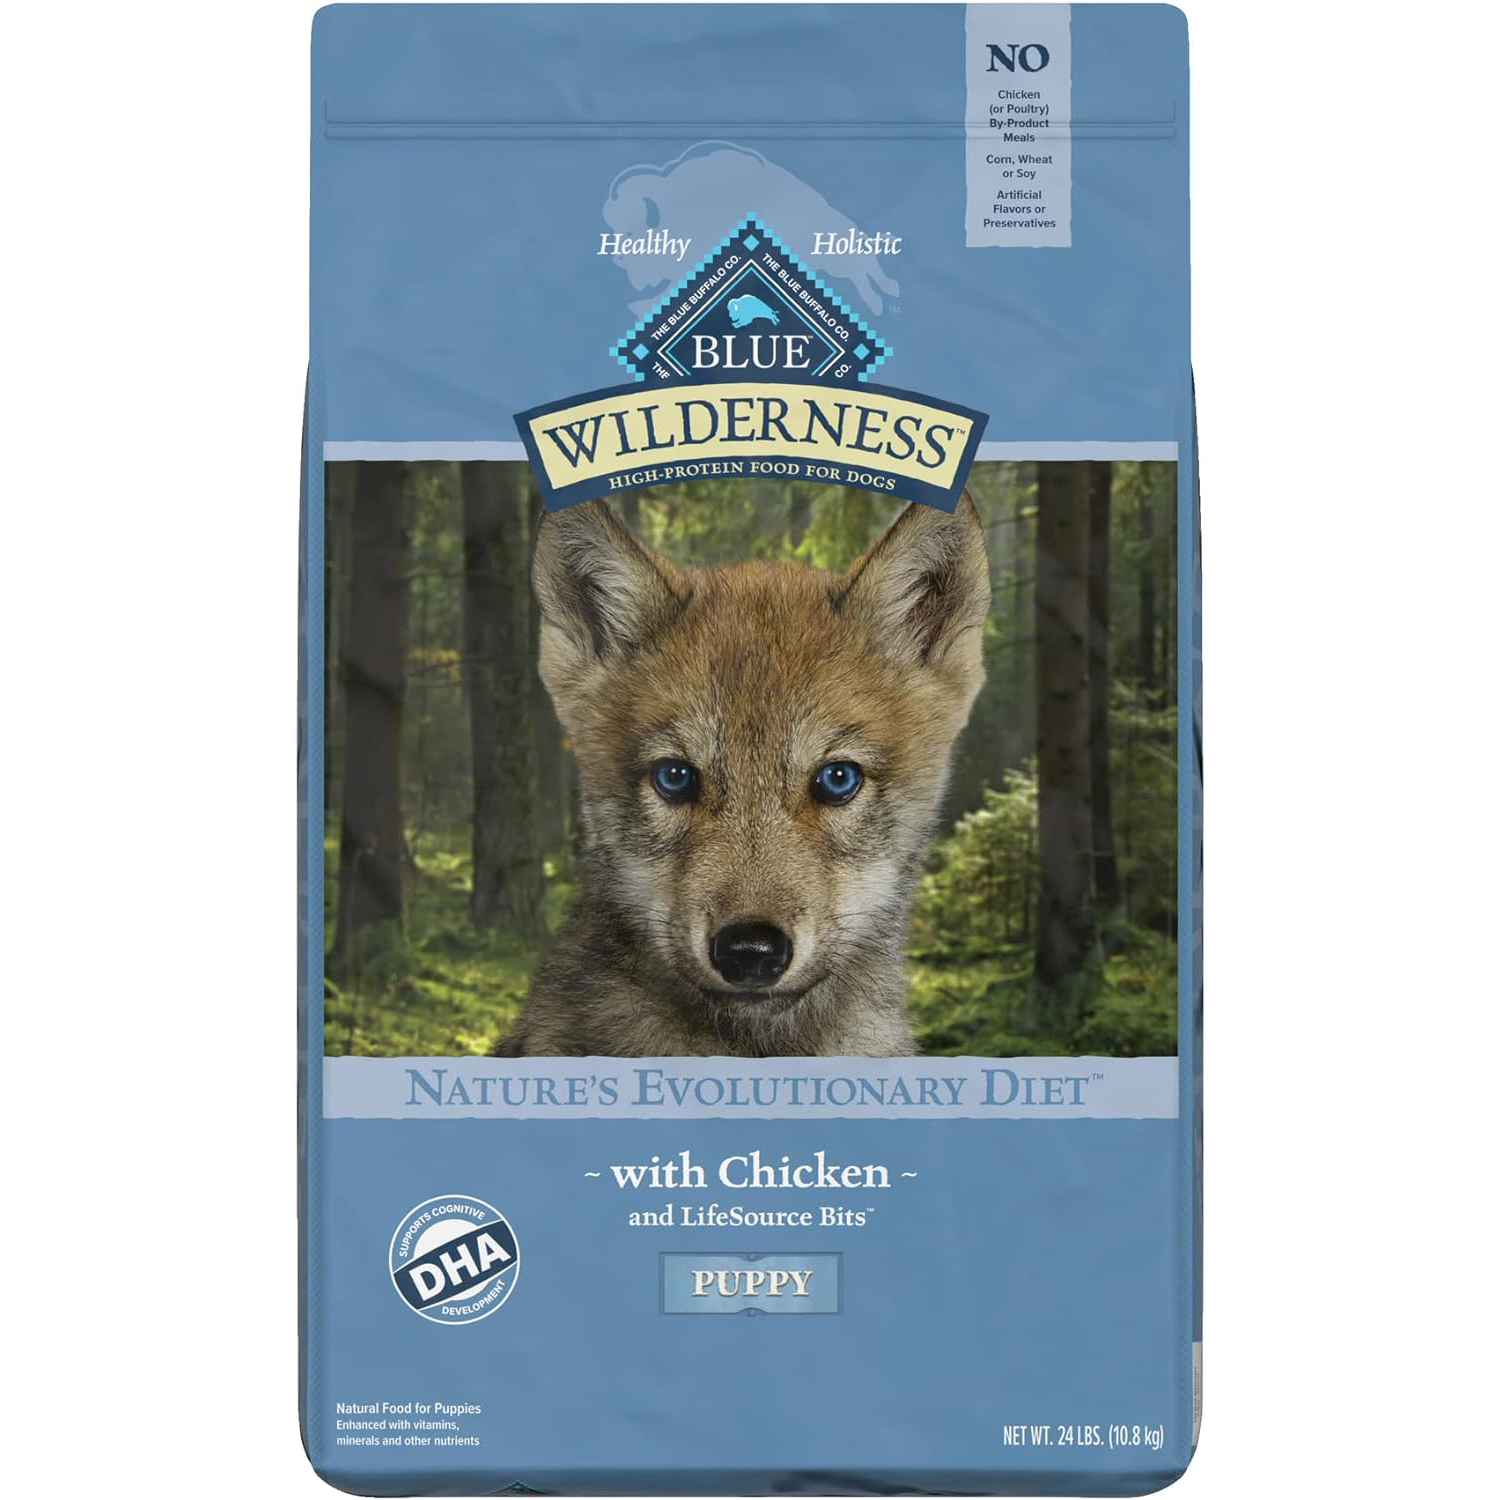 Blue Buffalo Wilderness High Protein, Natural Puppy Dry Dog Food 